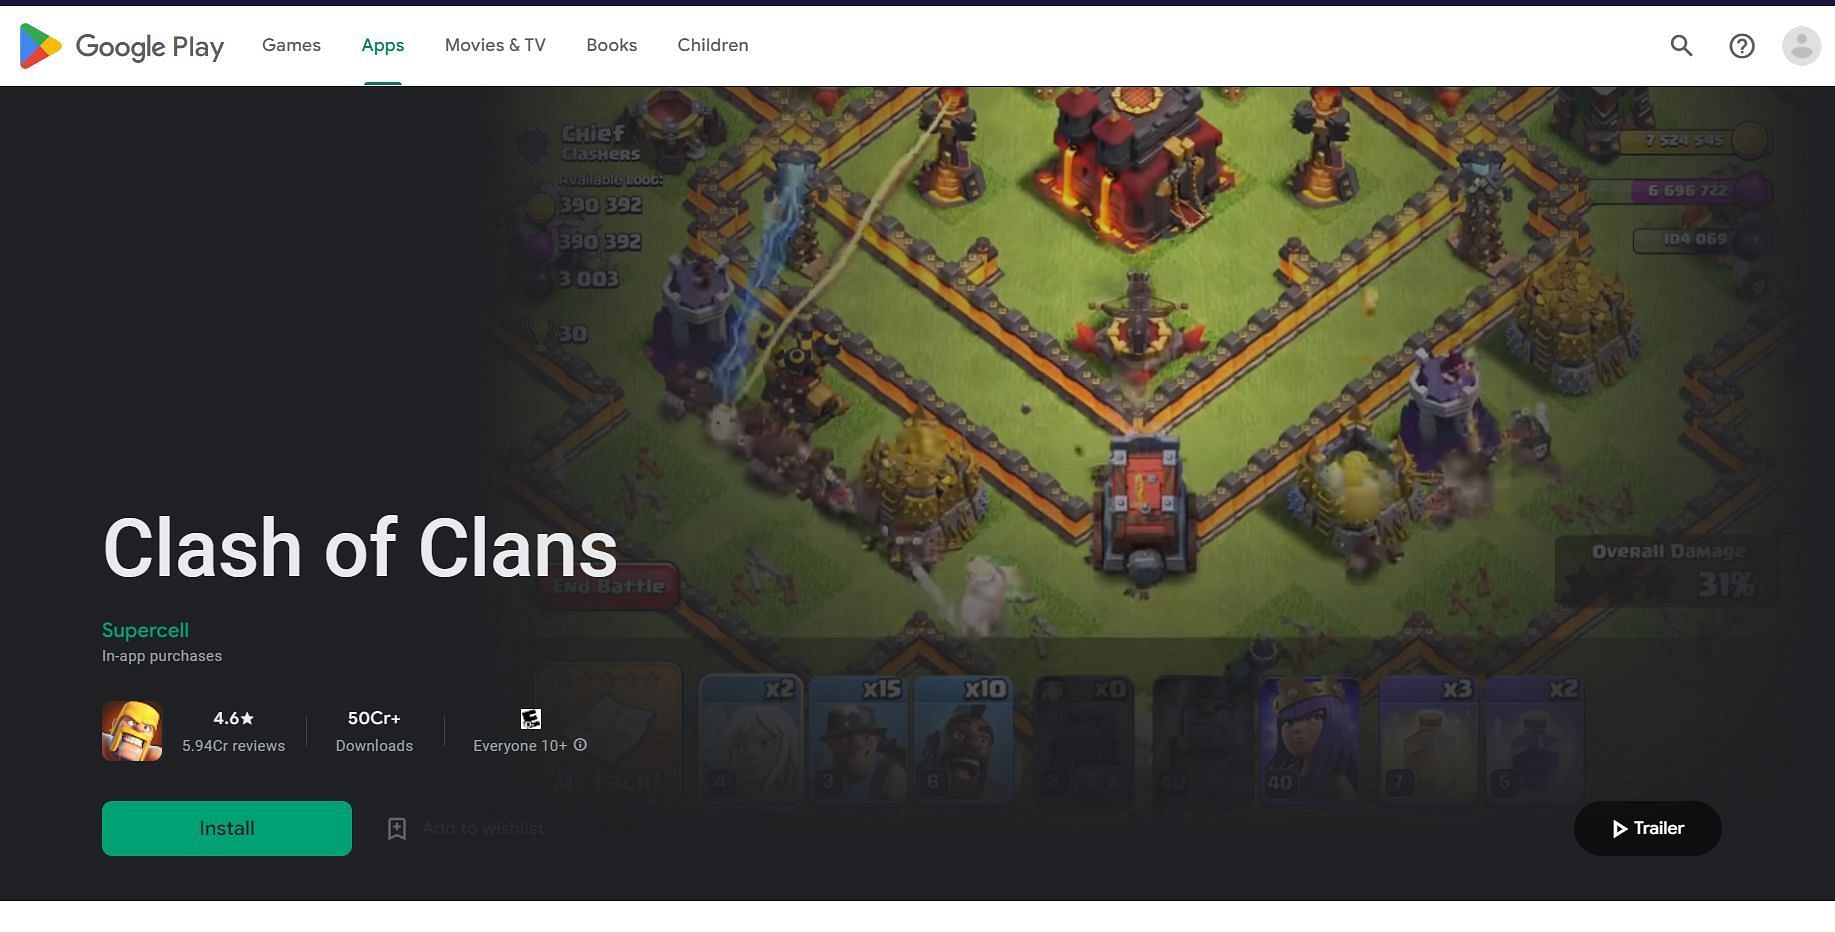 Those with Android devices must use the Google Play Store to download the latest Clash of Clans update (Image via Google Play Store)